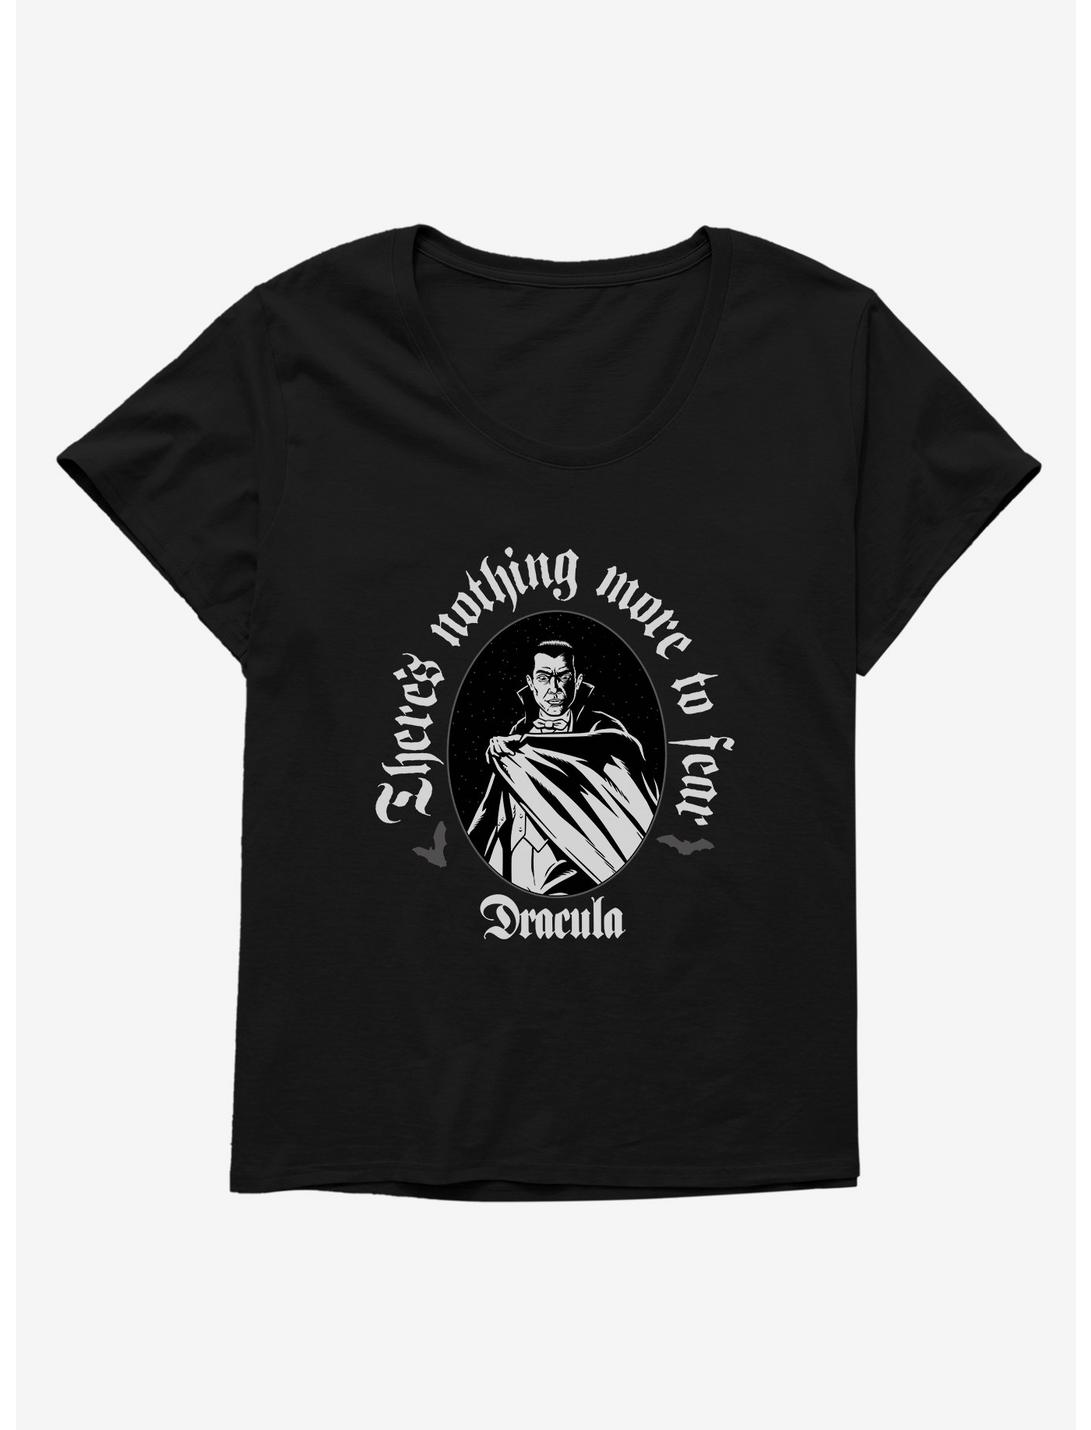 Universal Monsters Dracula There's Nothing More To Fear Womens T-Shirt Plus Size, BLACK, hi-res